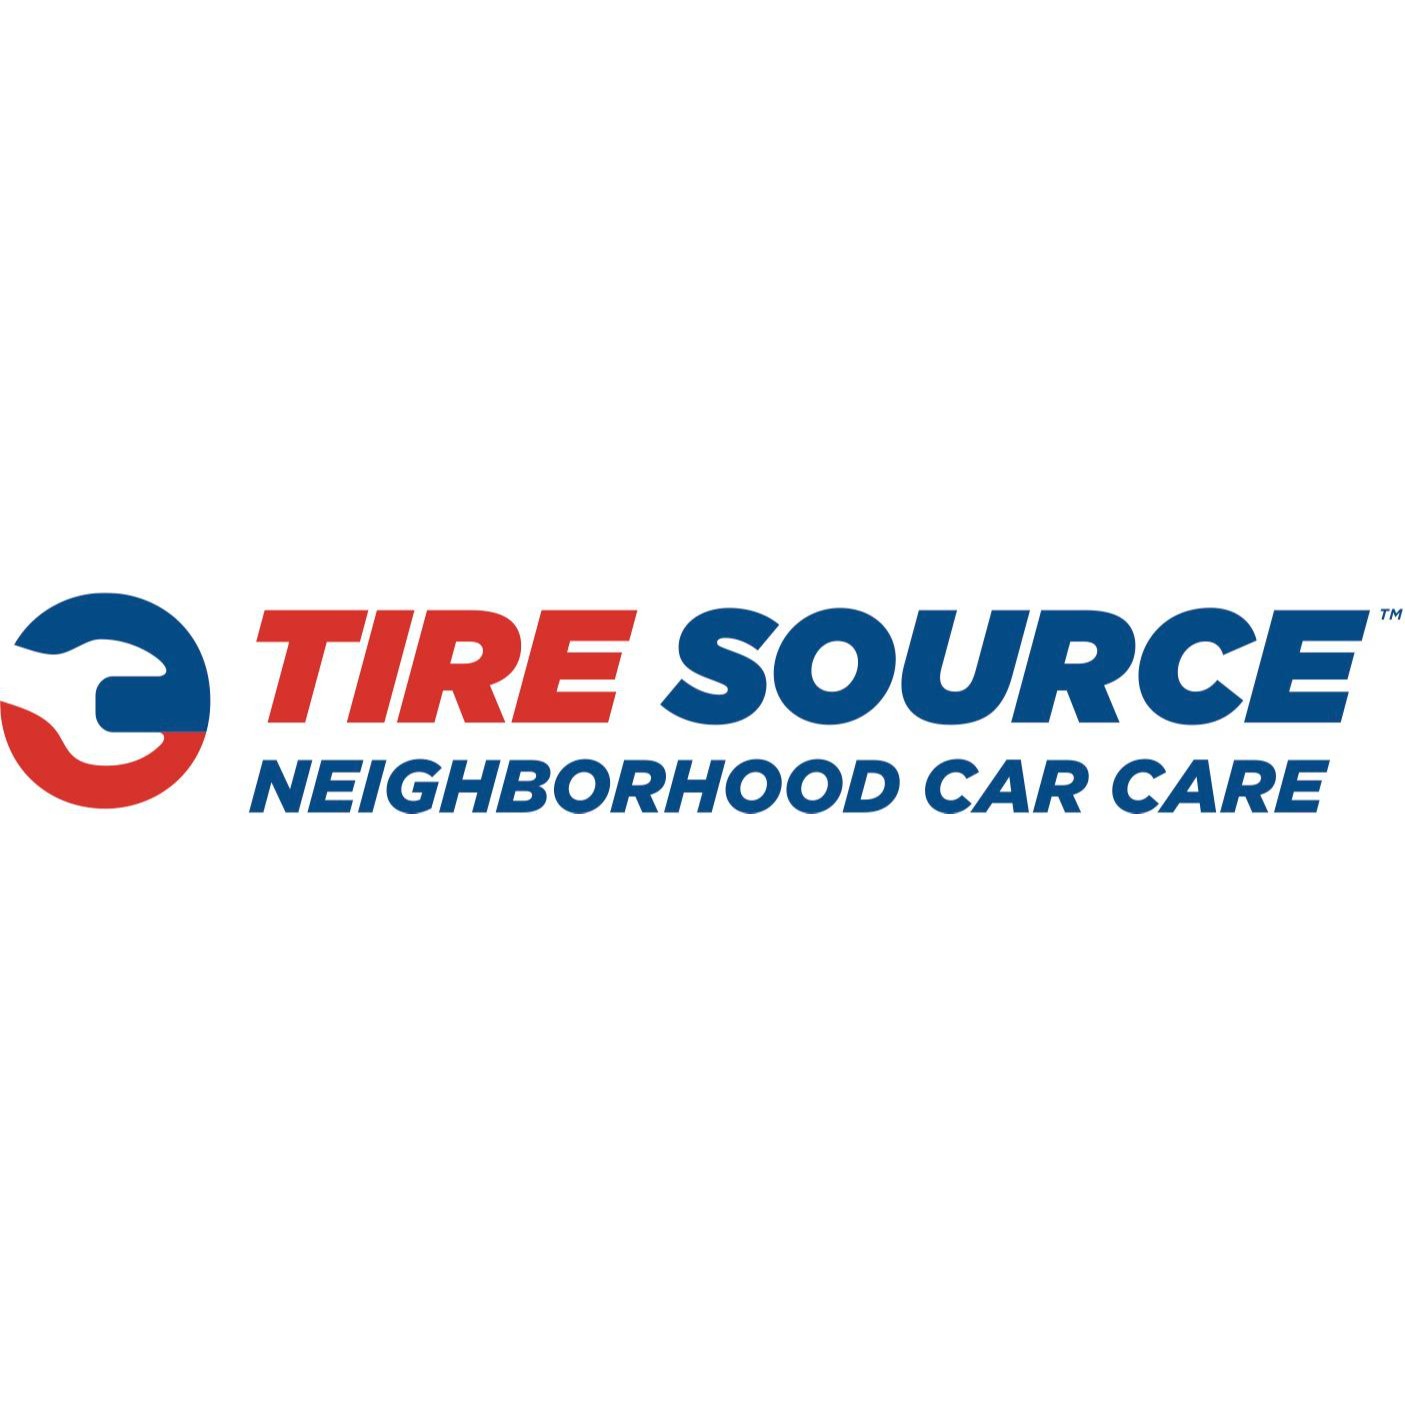 TIRE SOURCE